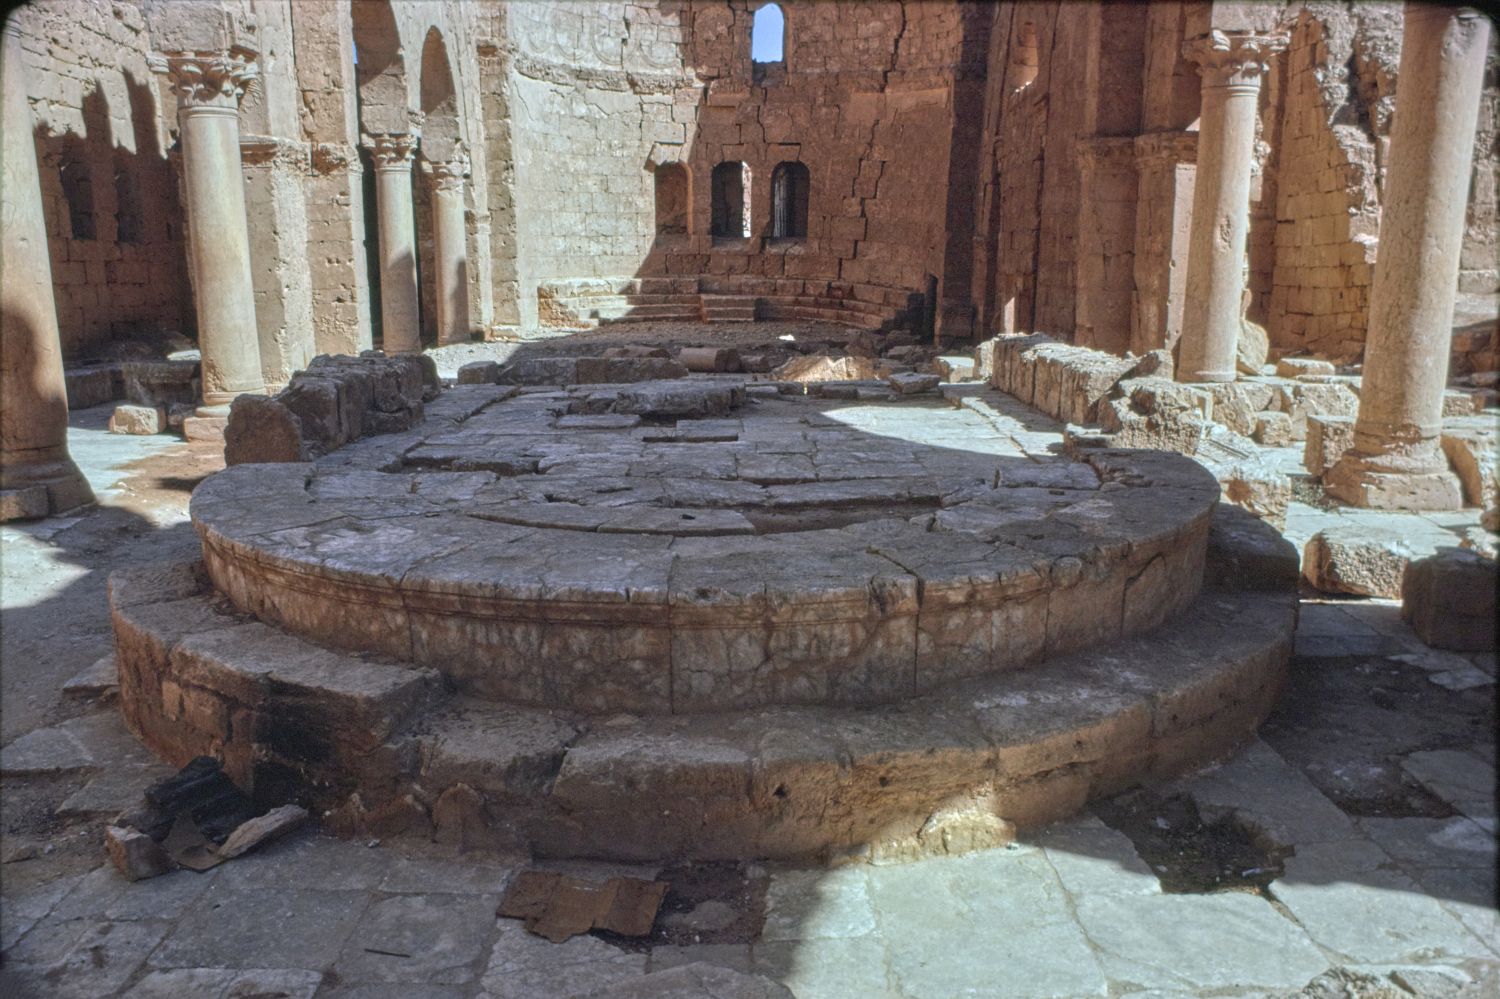 View down central nave toward east showing bema and apse.